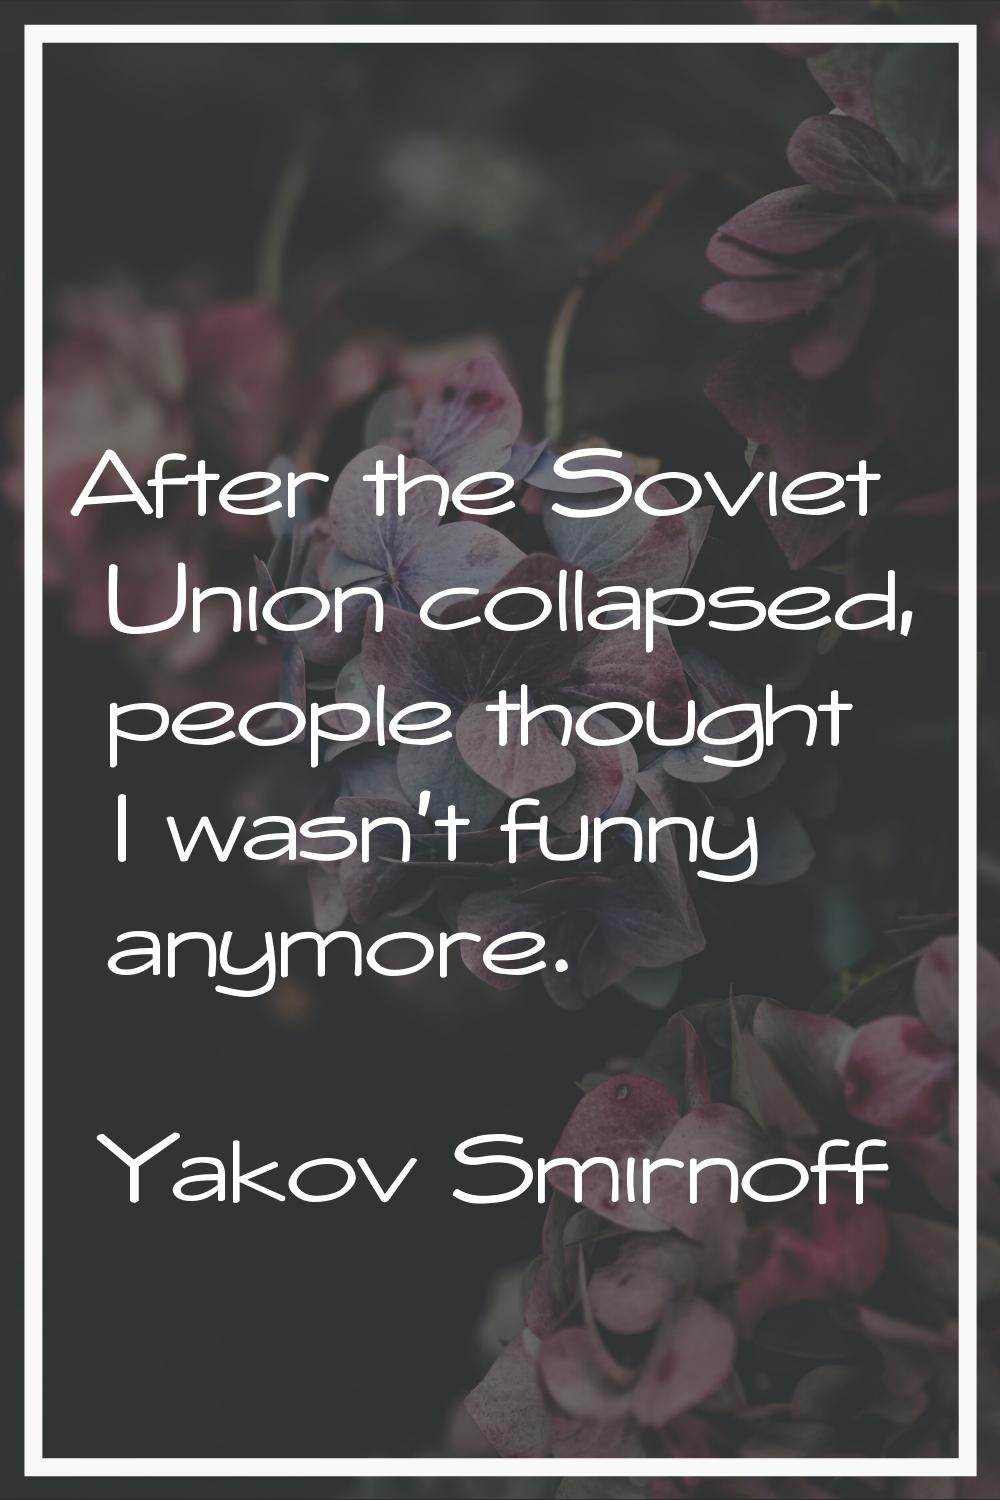 After the Soviet Union collapsed, people thought I wasn't funny anymore.